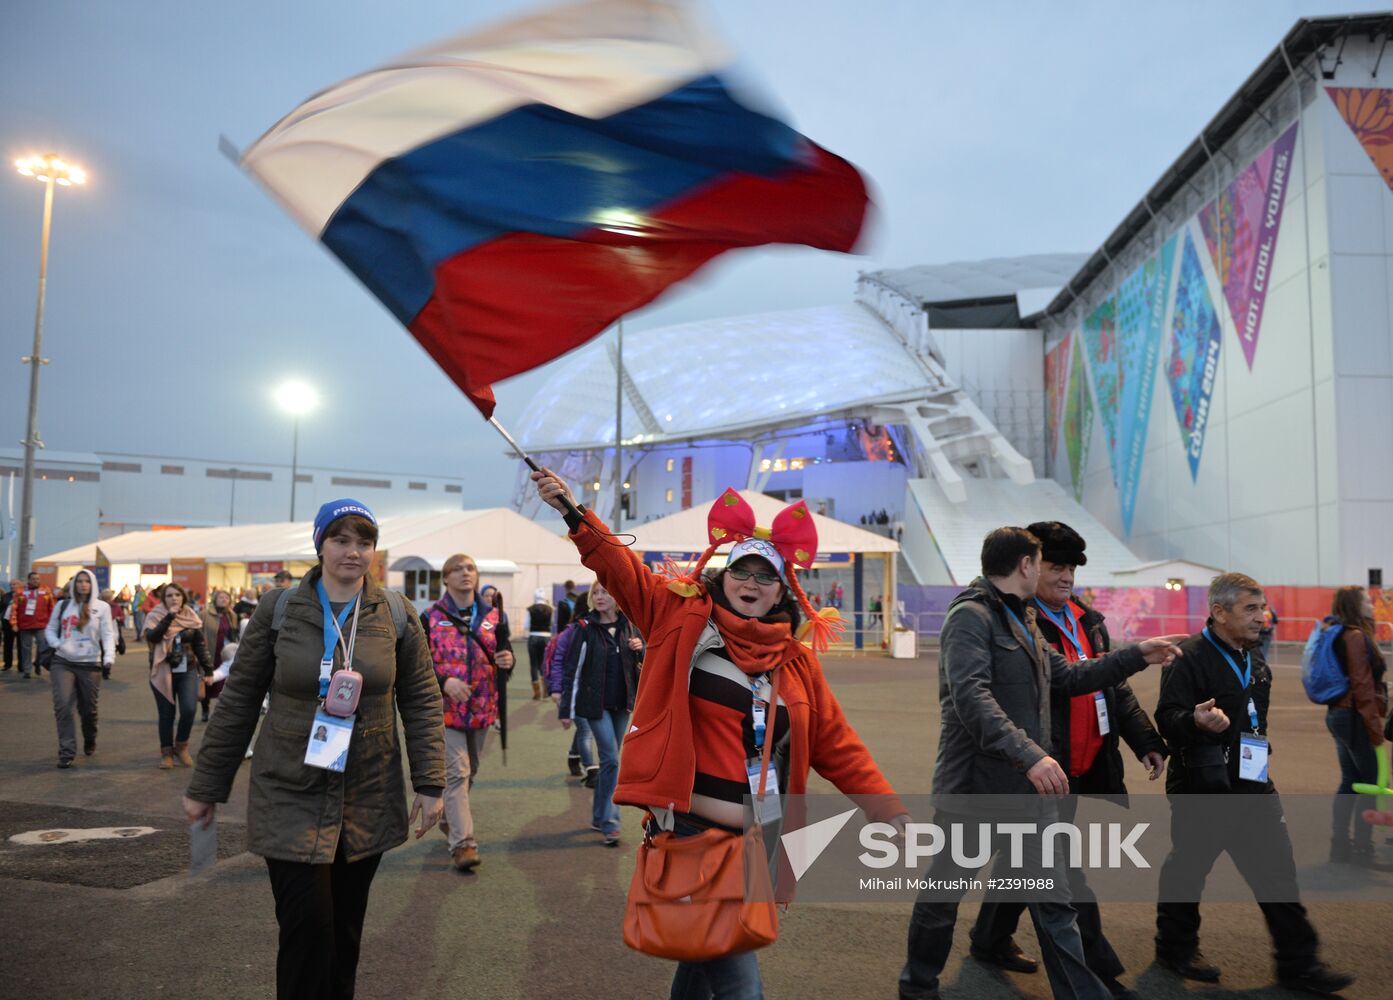 Spectators arrive at the opening ceremony of the Sochi 2014 Paralympic Winter Games